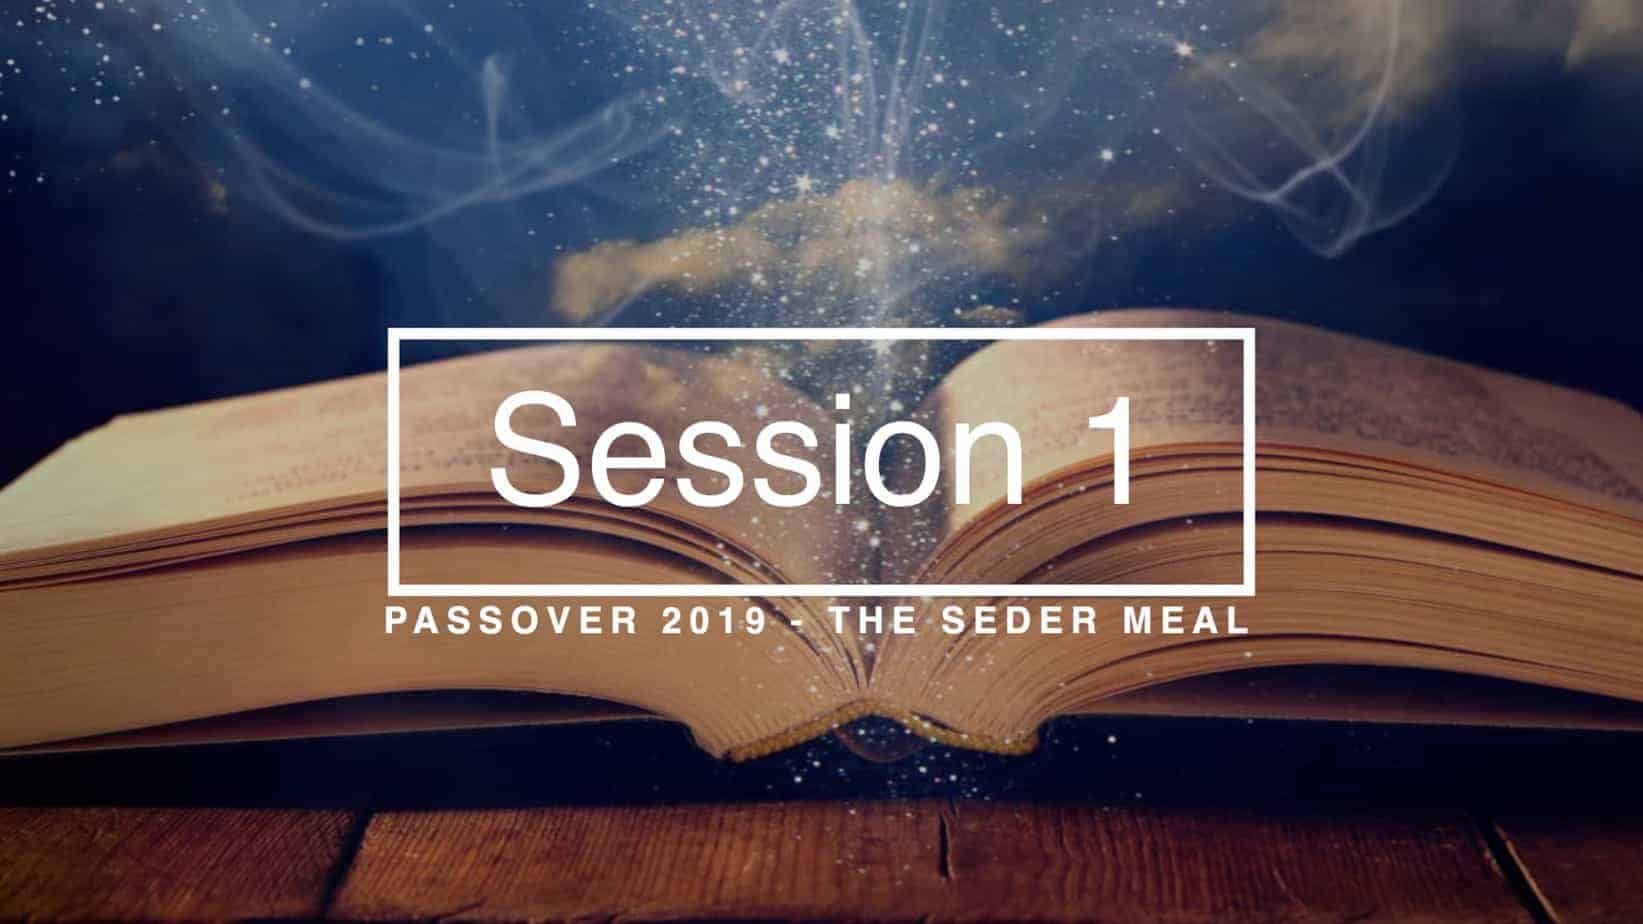 SESSION 1 PASSOVER 2019